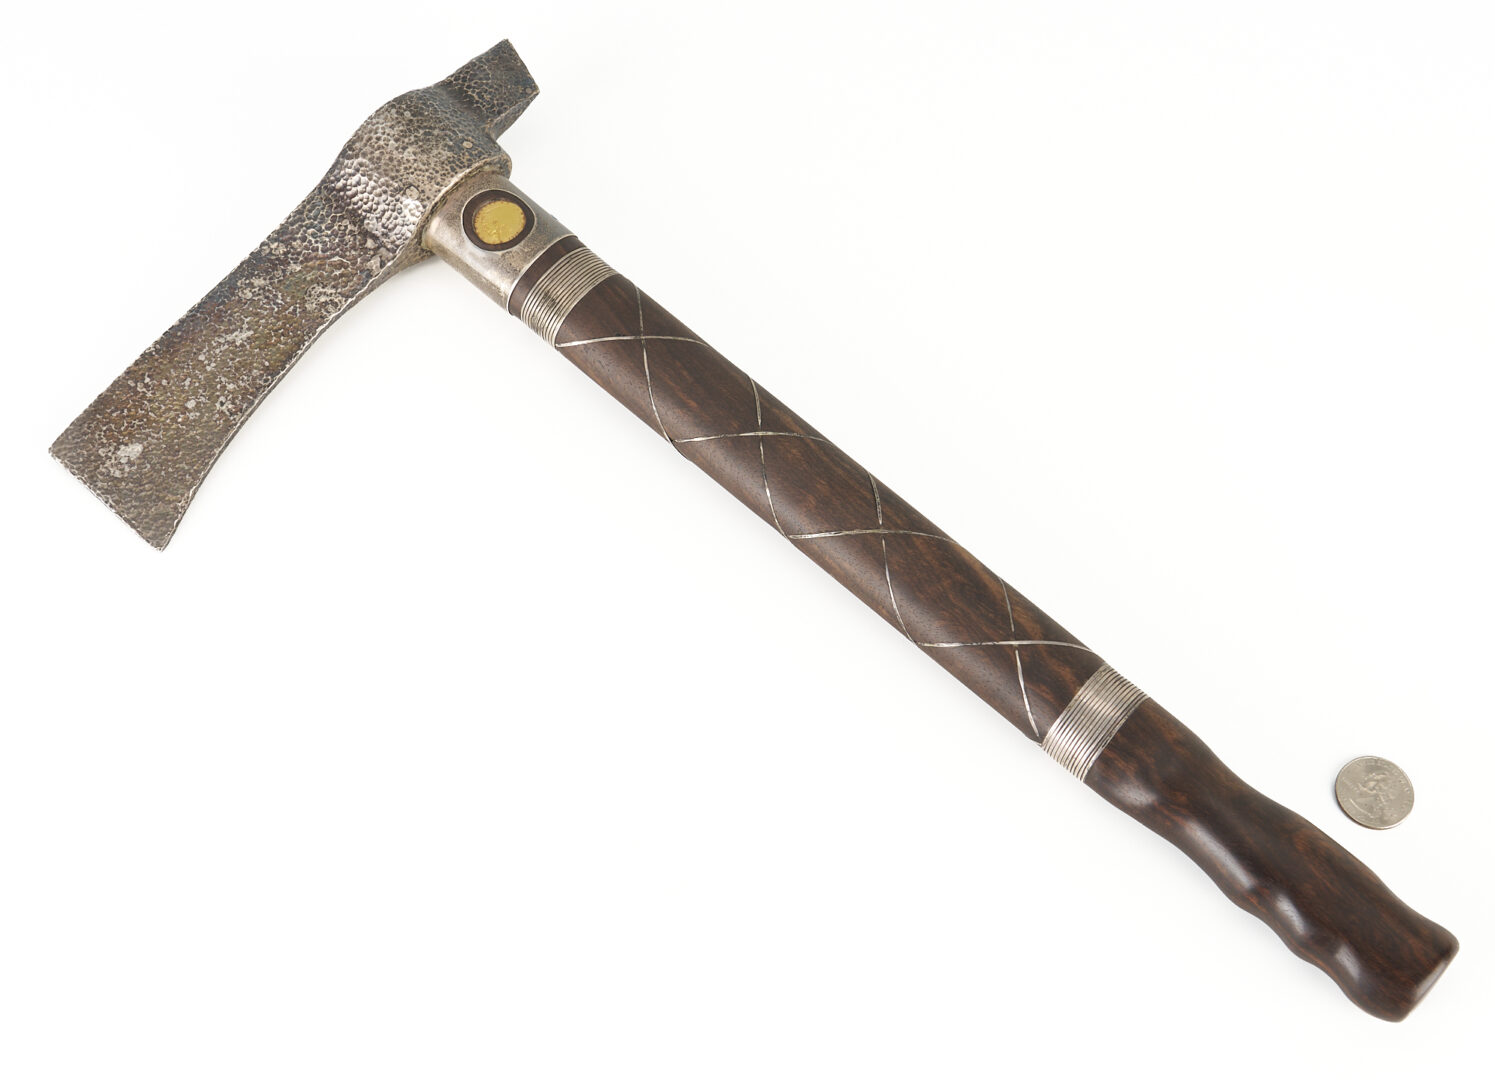 Lot 522: Silver Hatchet with Inlaid Gold Coin